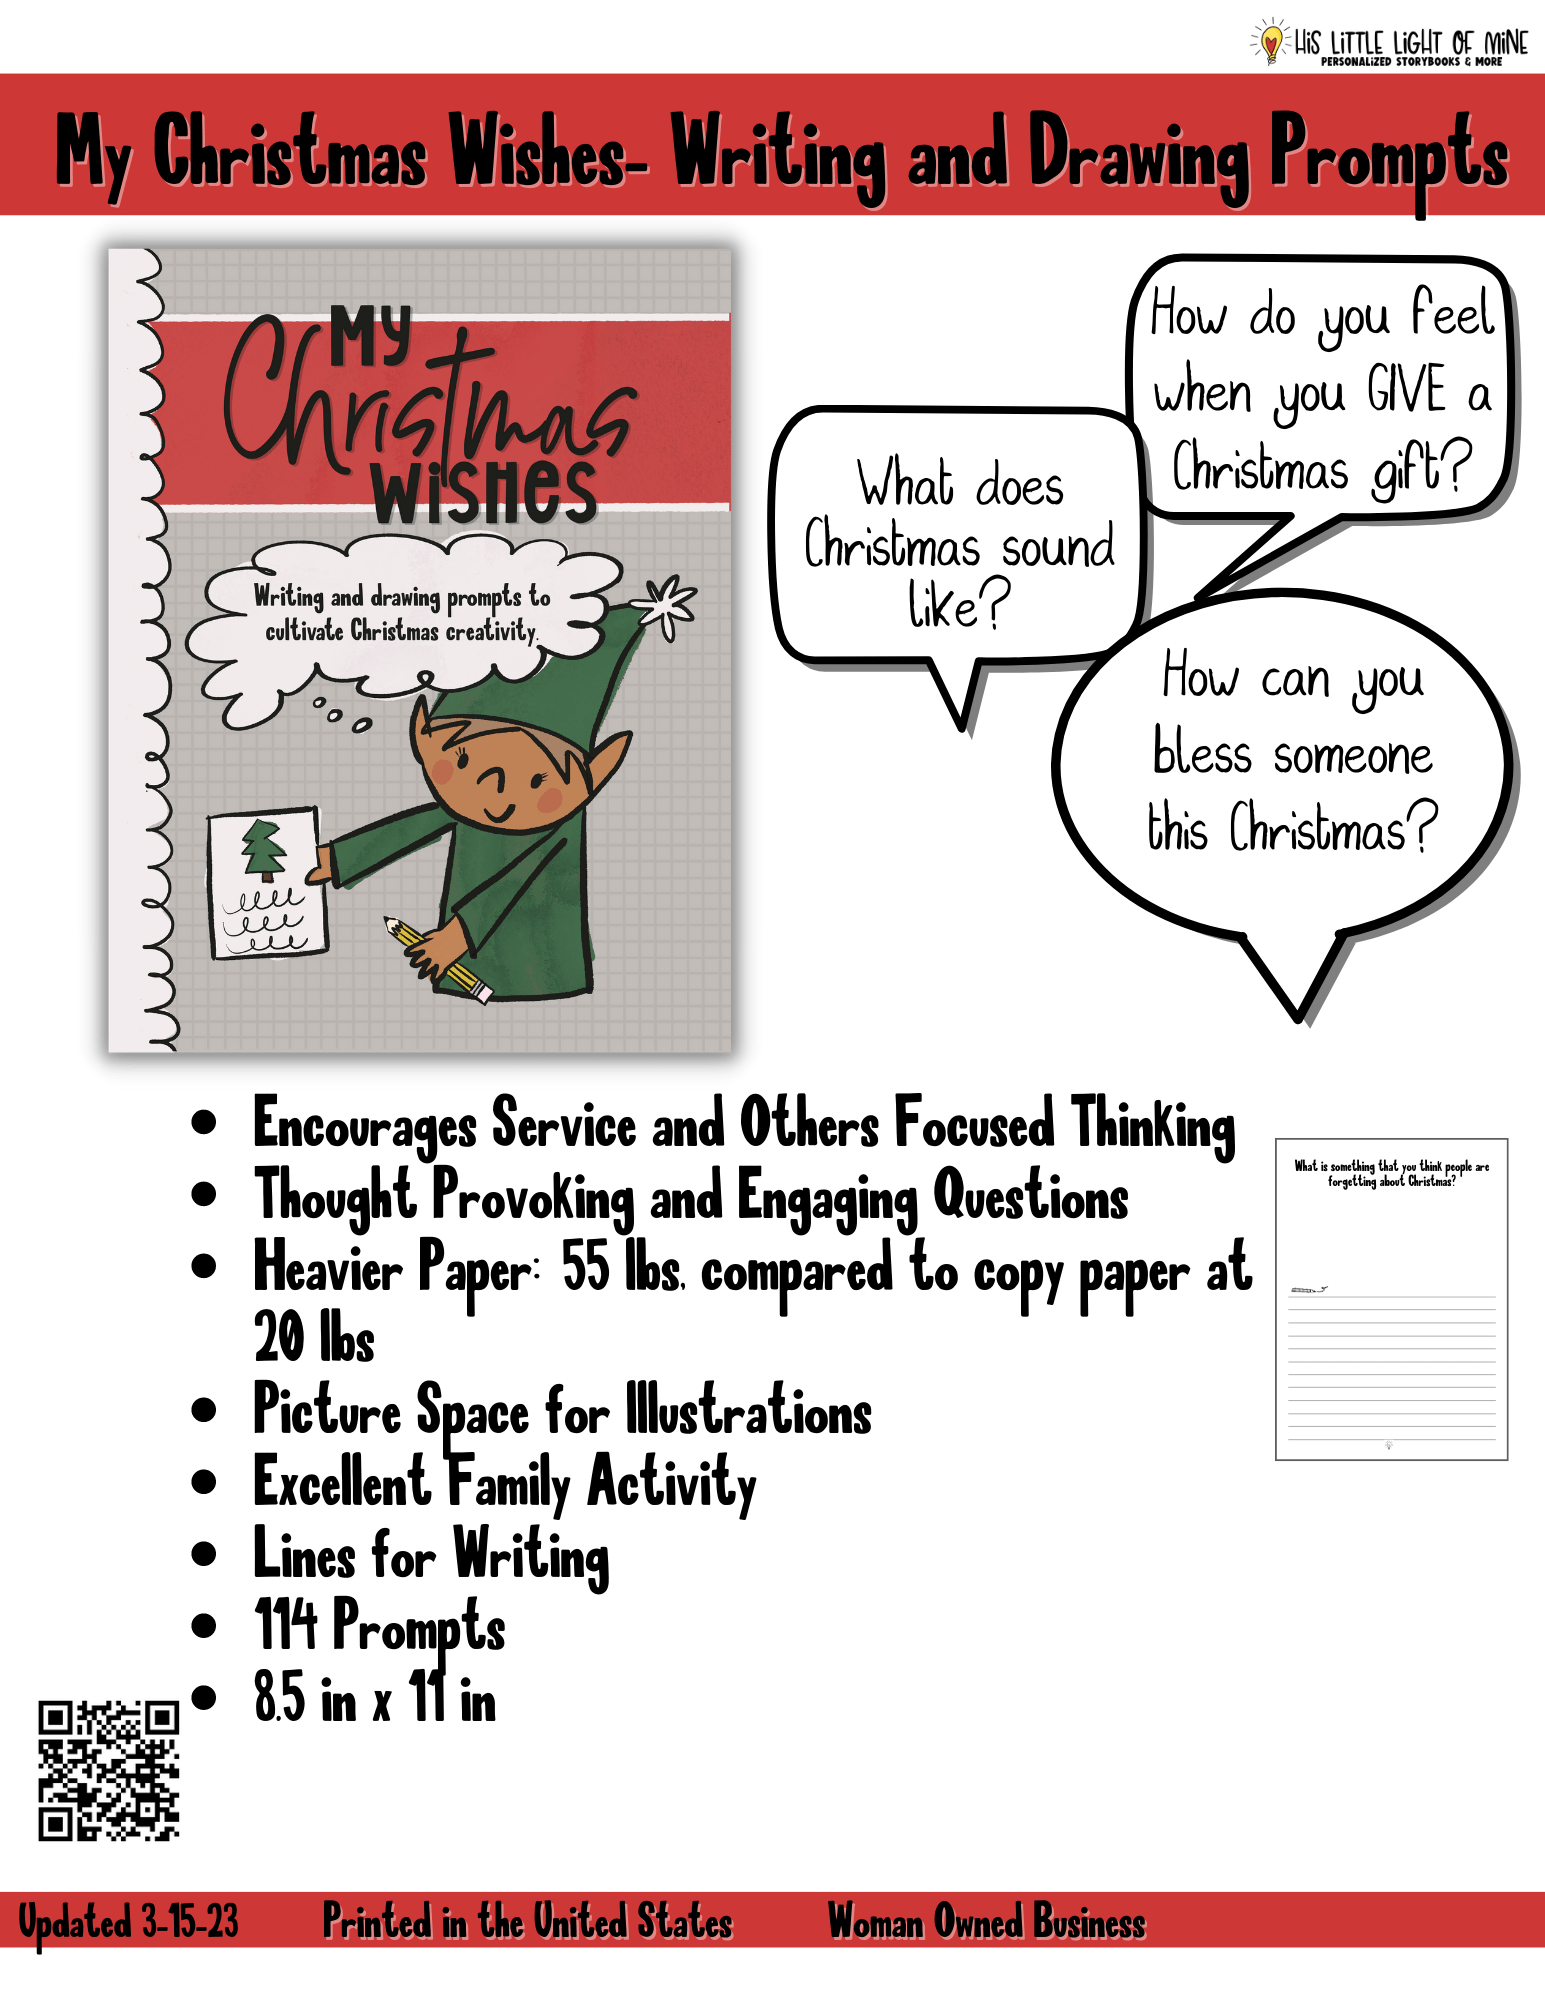 Bulk ad of the children’s Christmas drawing and writing prompt book called “My Christmas Wishes” self-published through Amazon Kindle Direct Publishing